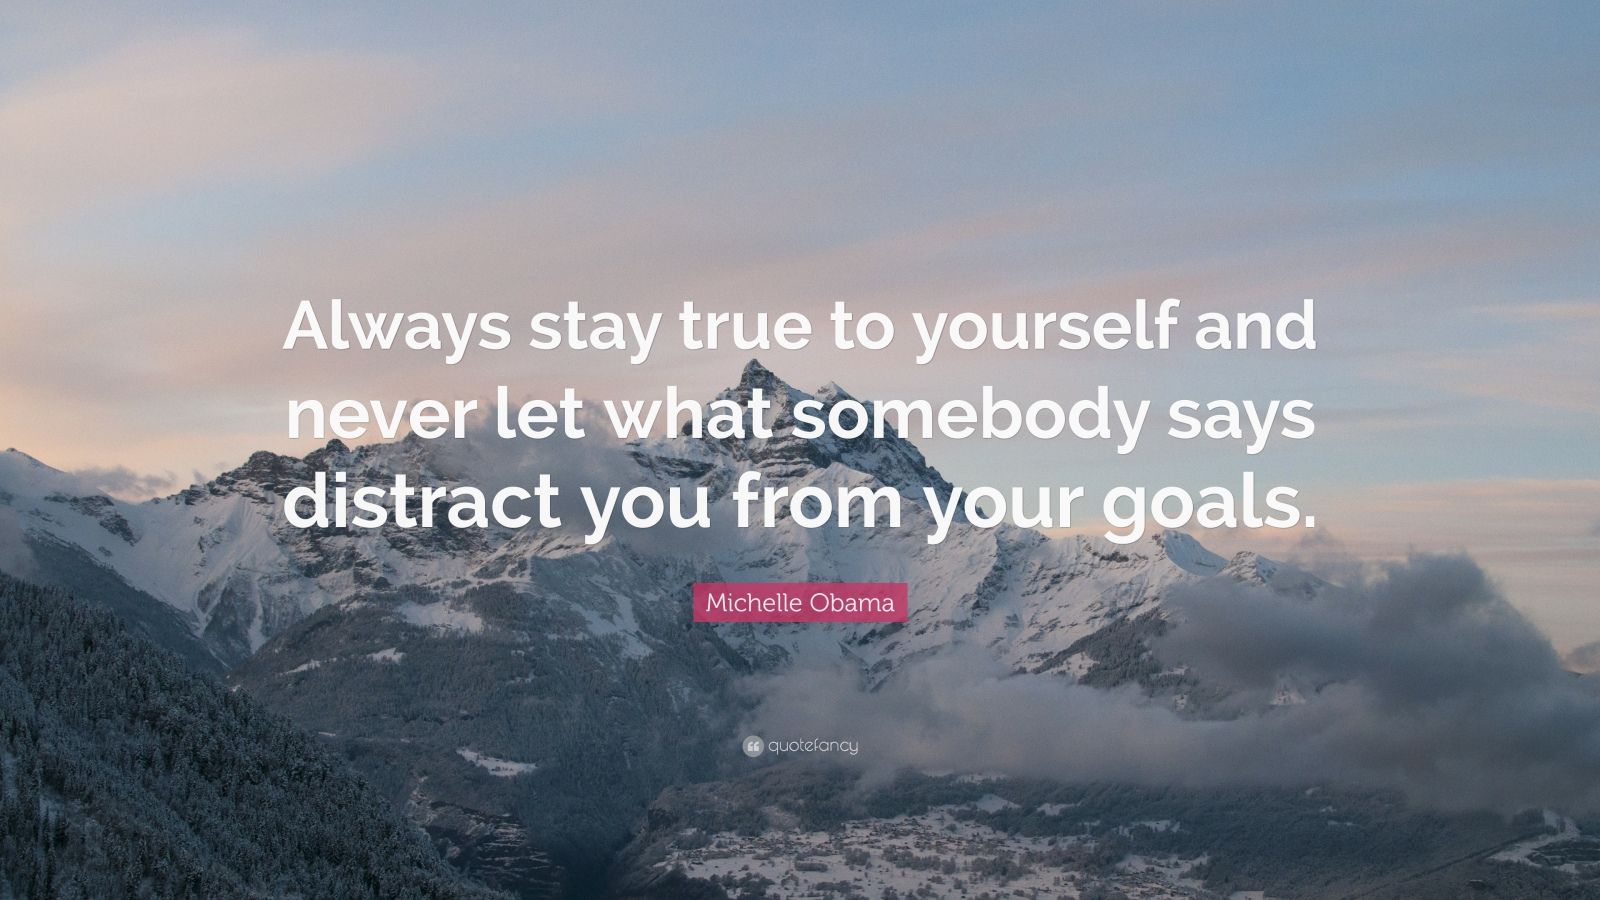 Michelle Obama Quote: “Always stay true to yourself and never let what